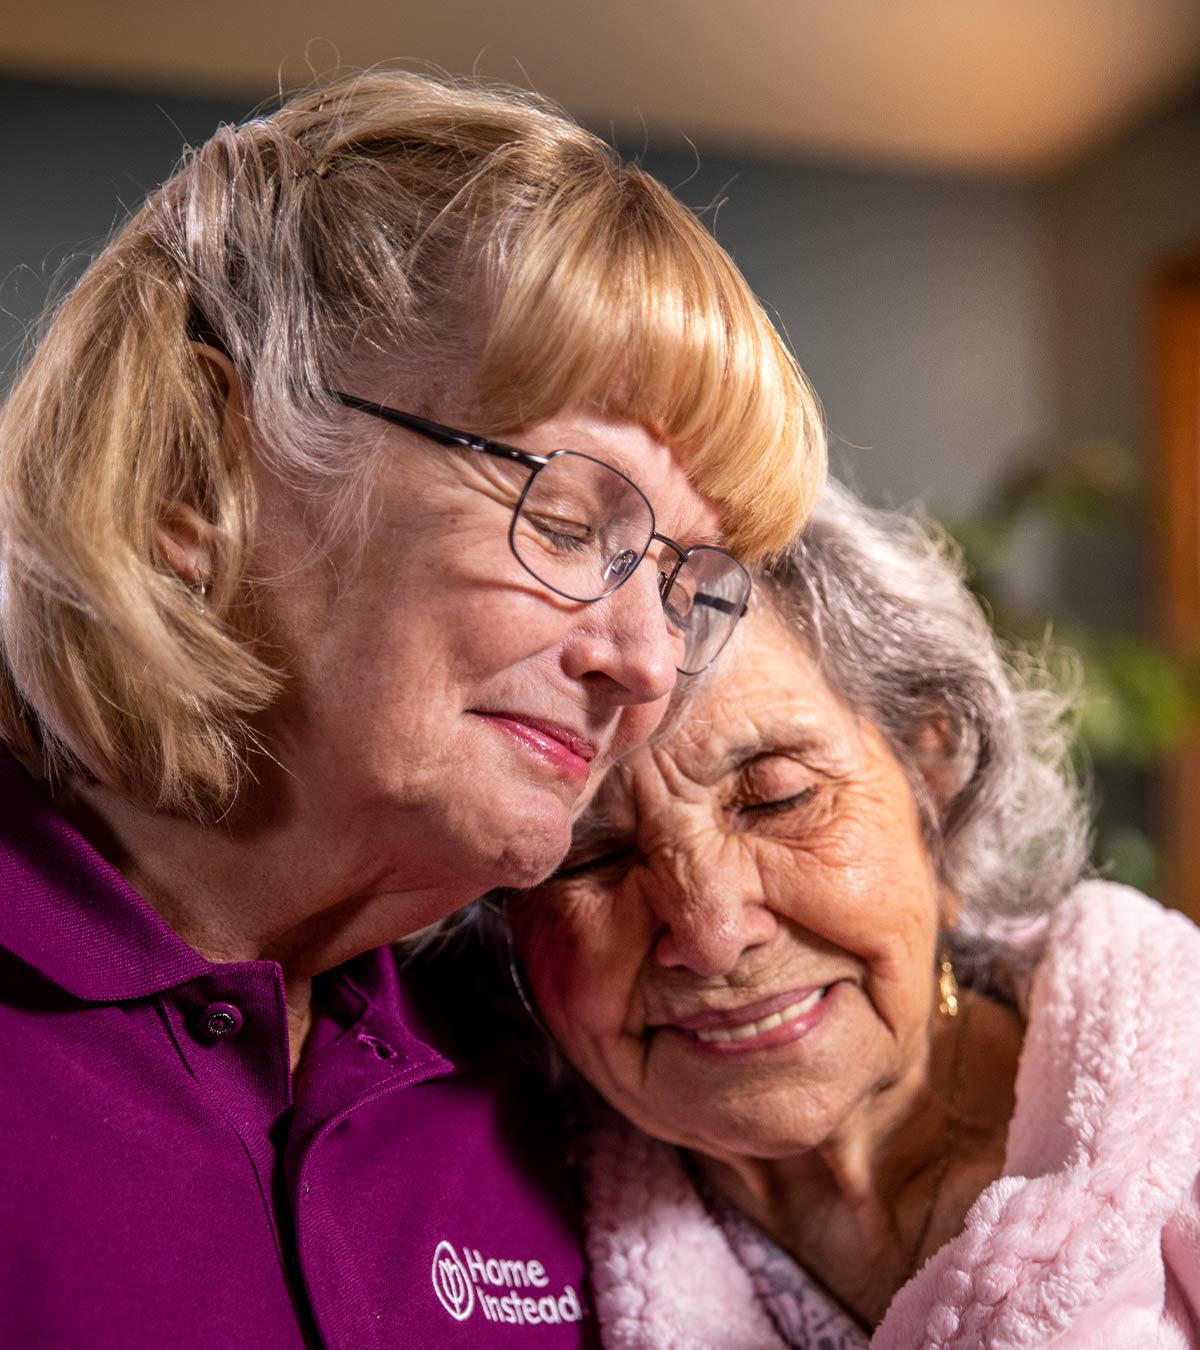 CAREGiver providing in-home senior care services. Home Instead of Jasper, IN provides Elder Care to aging adults. 